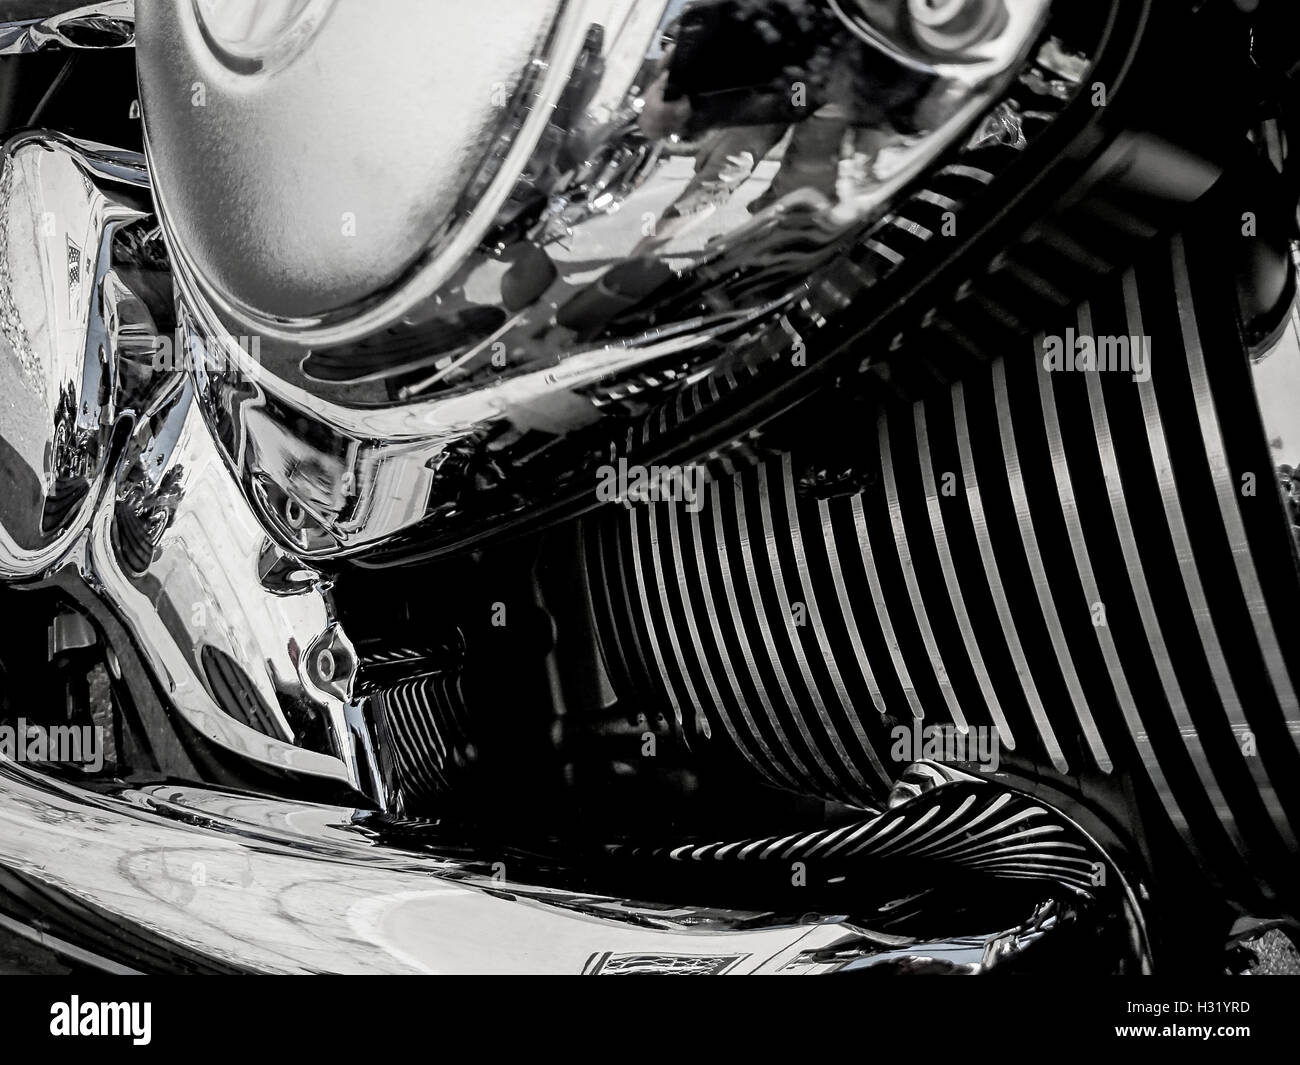 Motorcycle engine closeup as background Stock Photo